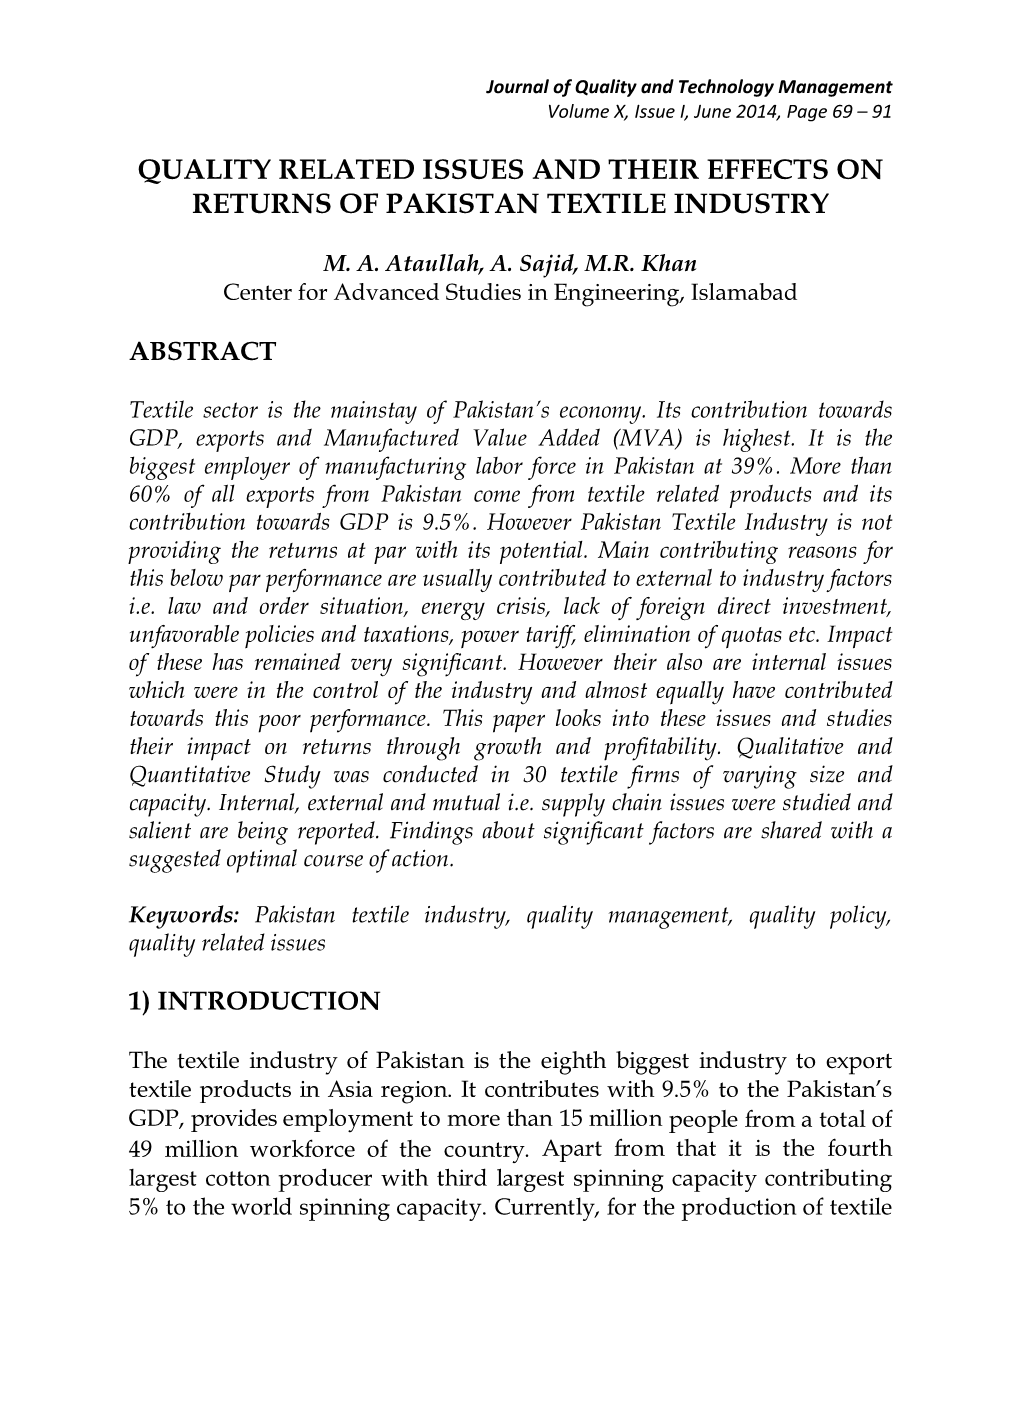 Quality Related Issues and Their Effects on Returns of Pakistan Textile Industry